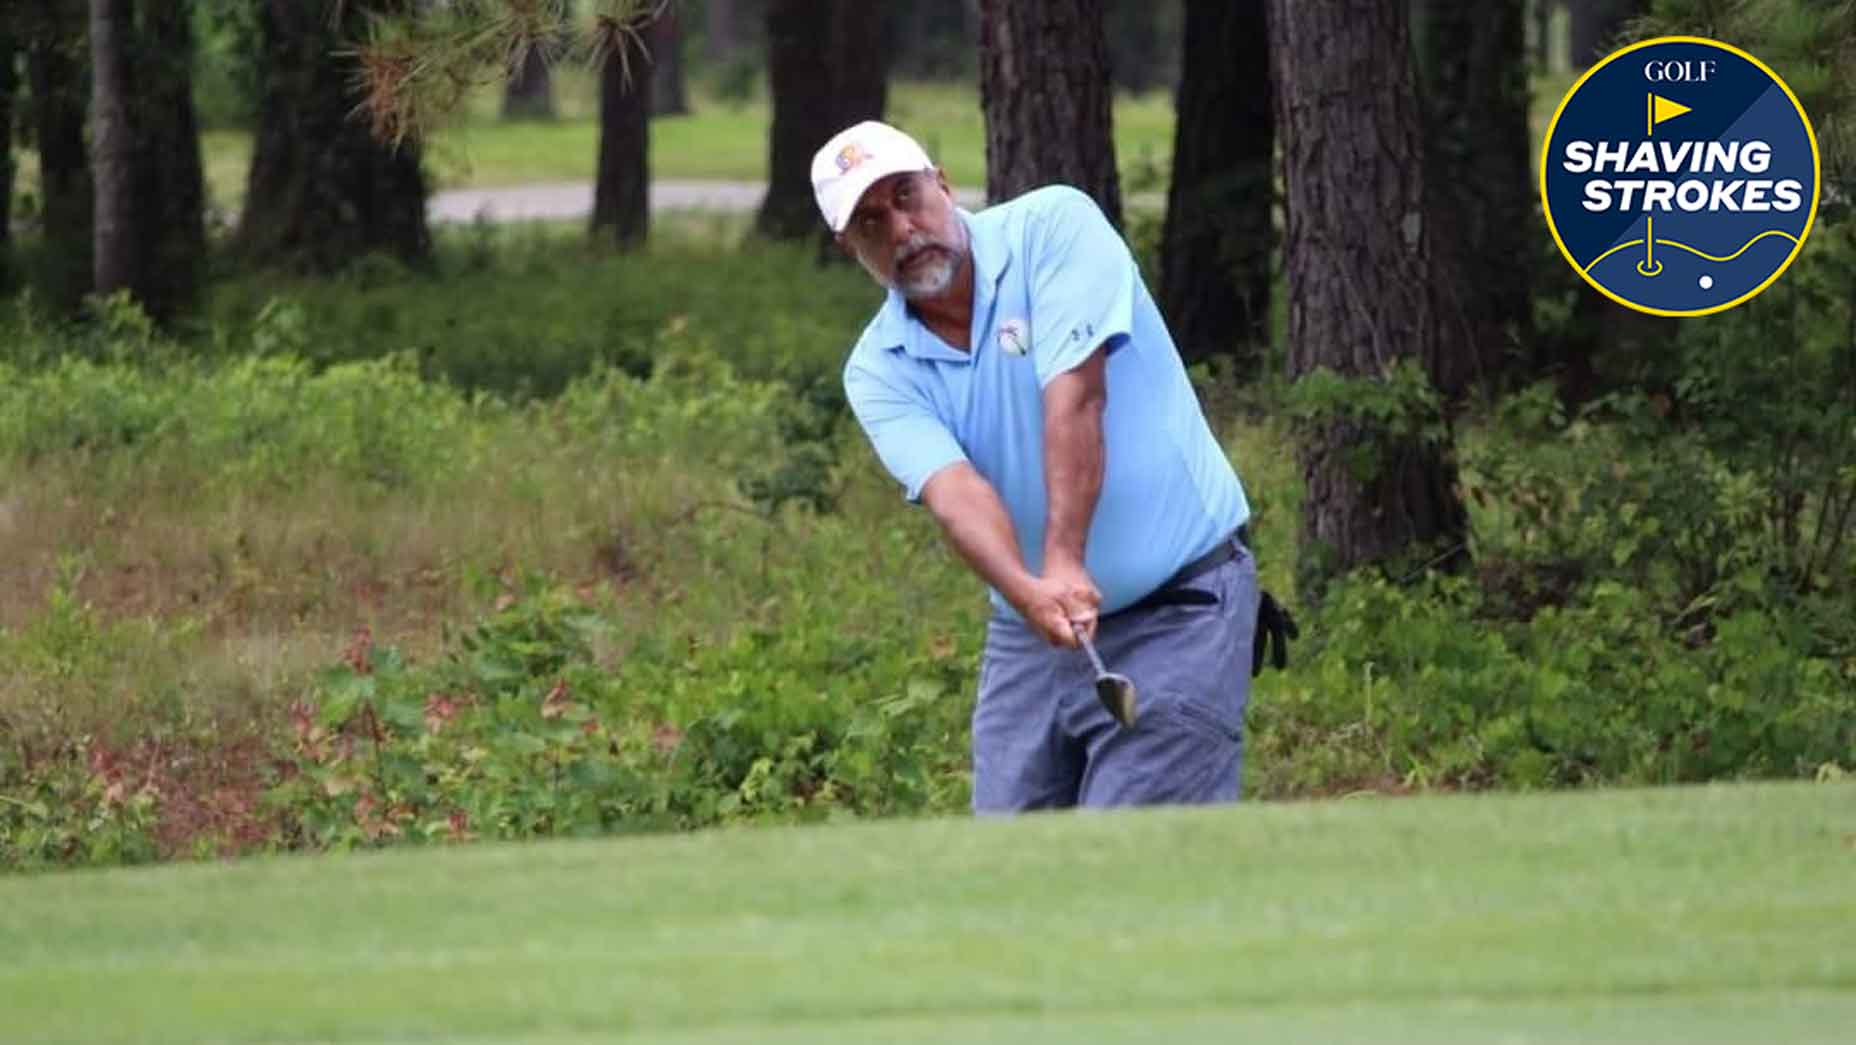 In today's Shaving Strokes story, a 62-year-old golfer shares how he's been able to lower his scores despite chronic injuries